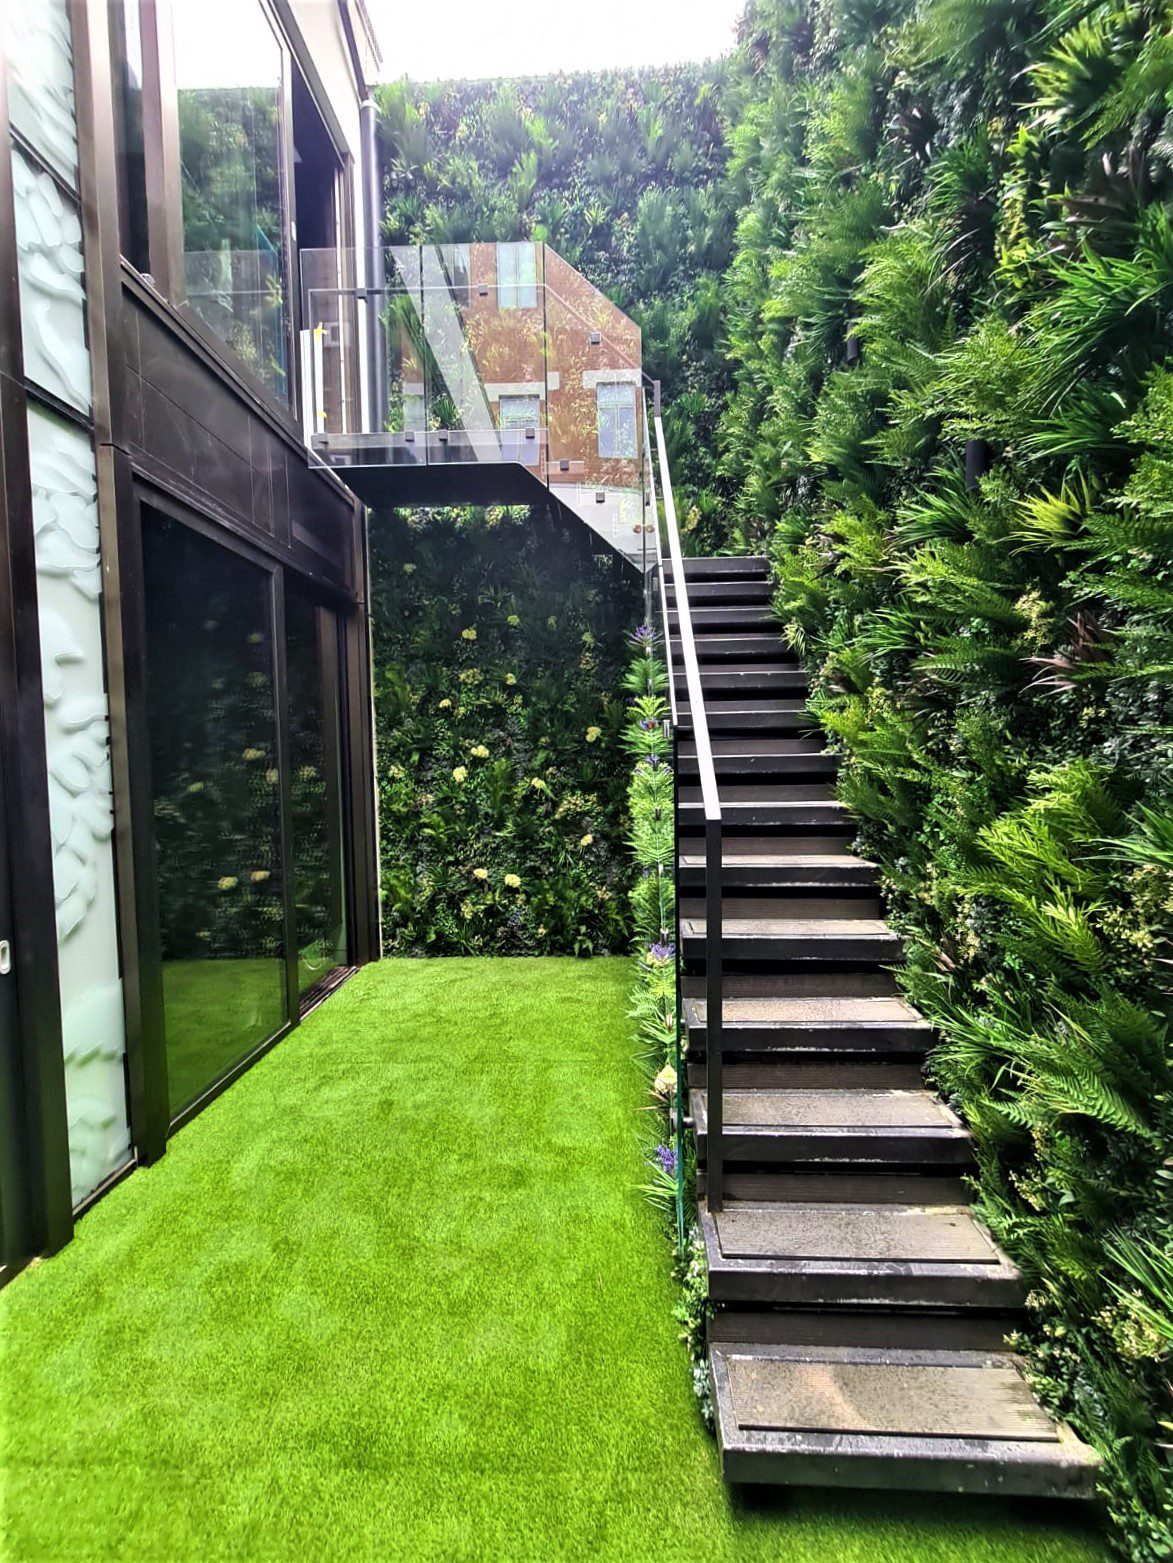 Basement staircase in London, surrounded by Artificial Green Wall